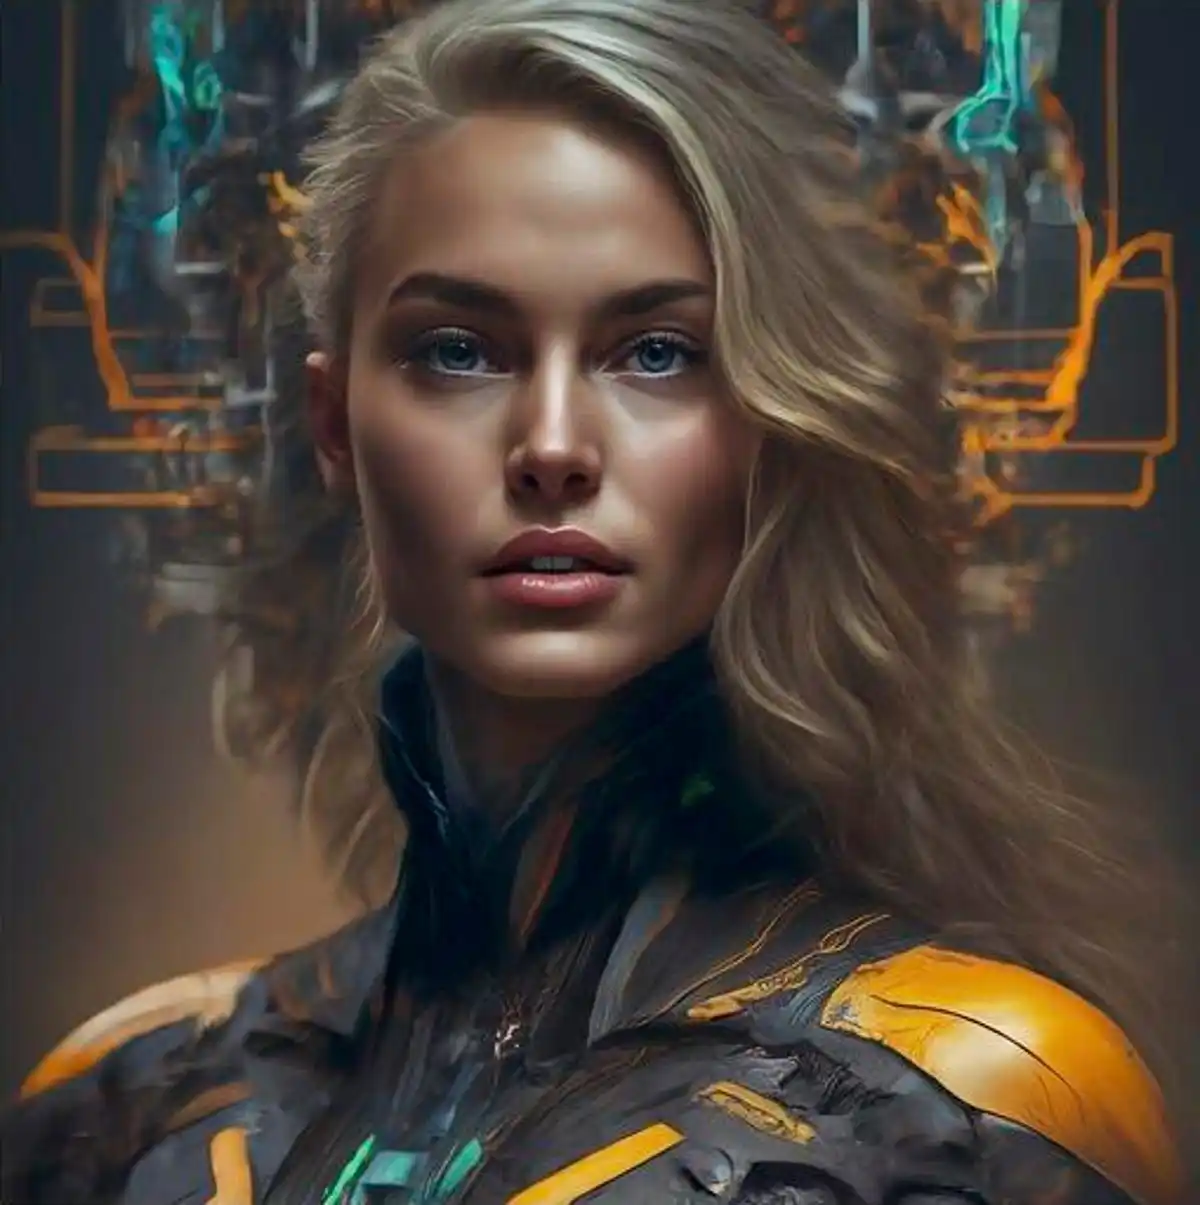 Bard-generated image of a blonde cyborg